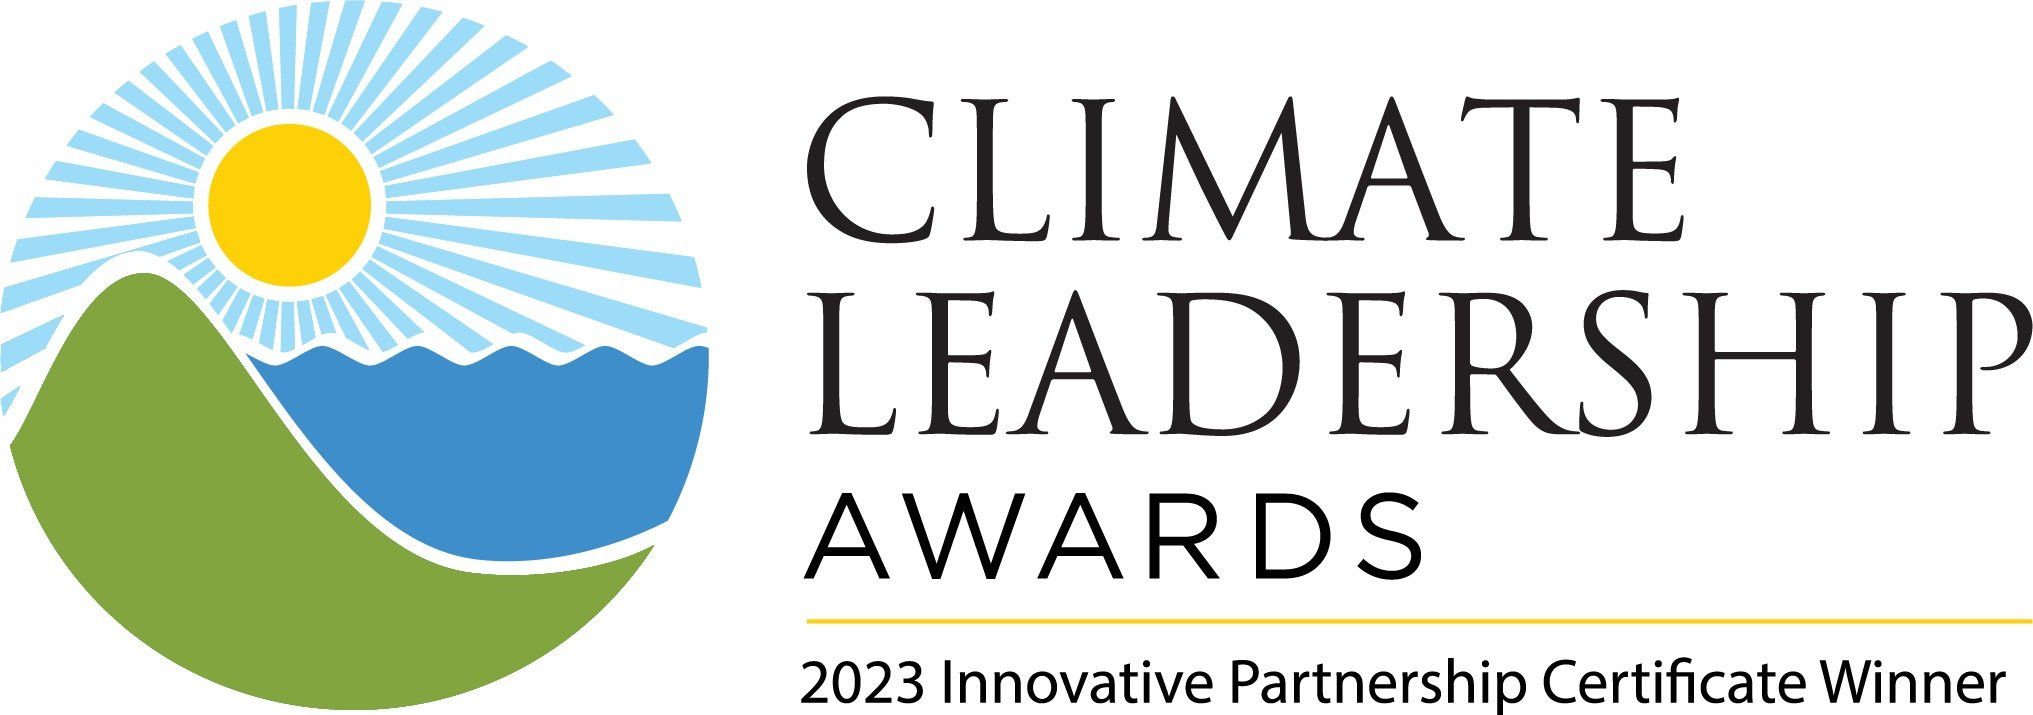 Penske Transportation Solutions was recognized in Los Angeles by the Climate Registry for its work with electric trucks. Penske was honored with an Innovative Partnership Certificate at the 2023 Climate Leadership Awards for being a part of the Freightliner Electric Innovation Fleet.